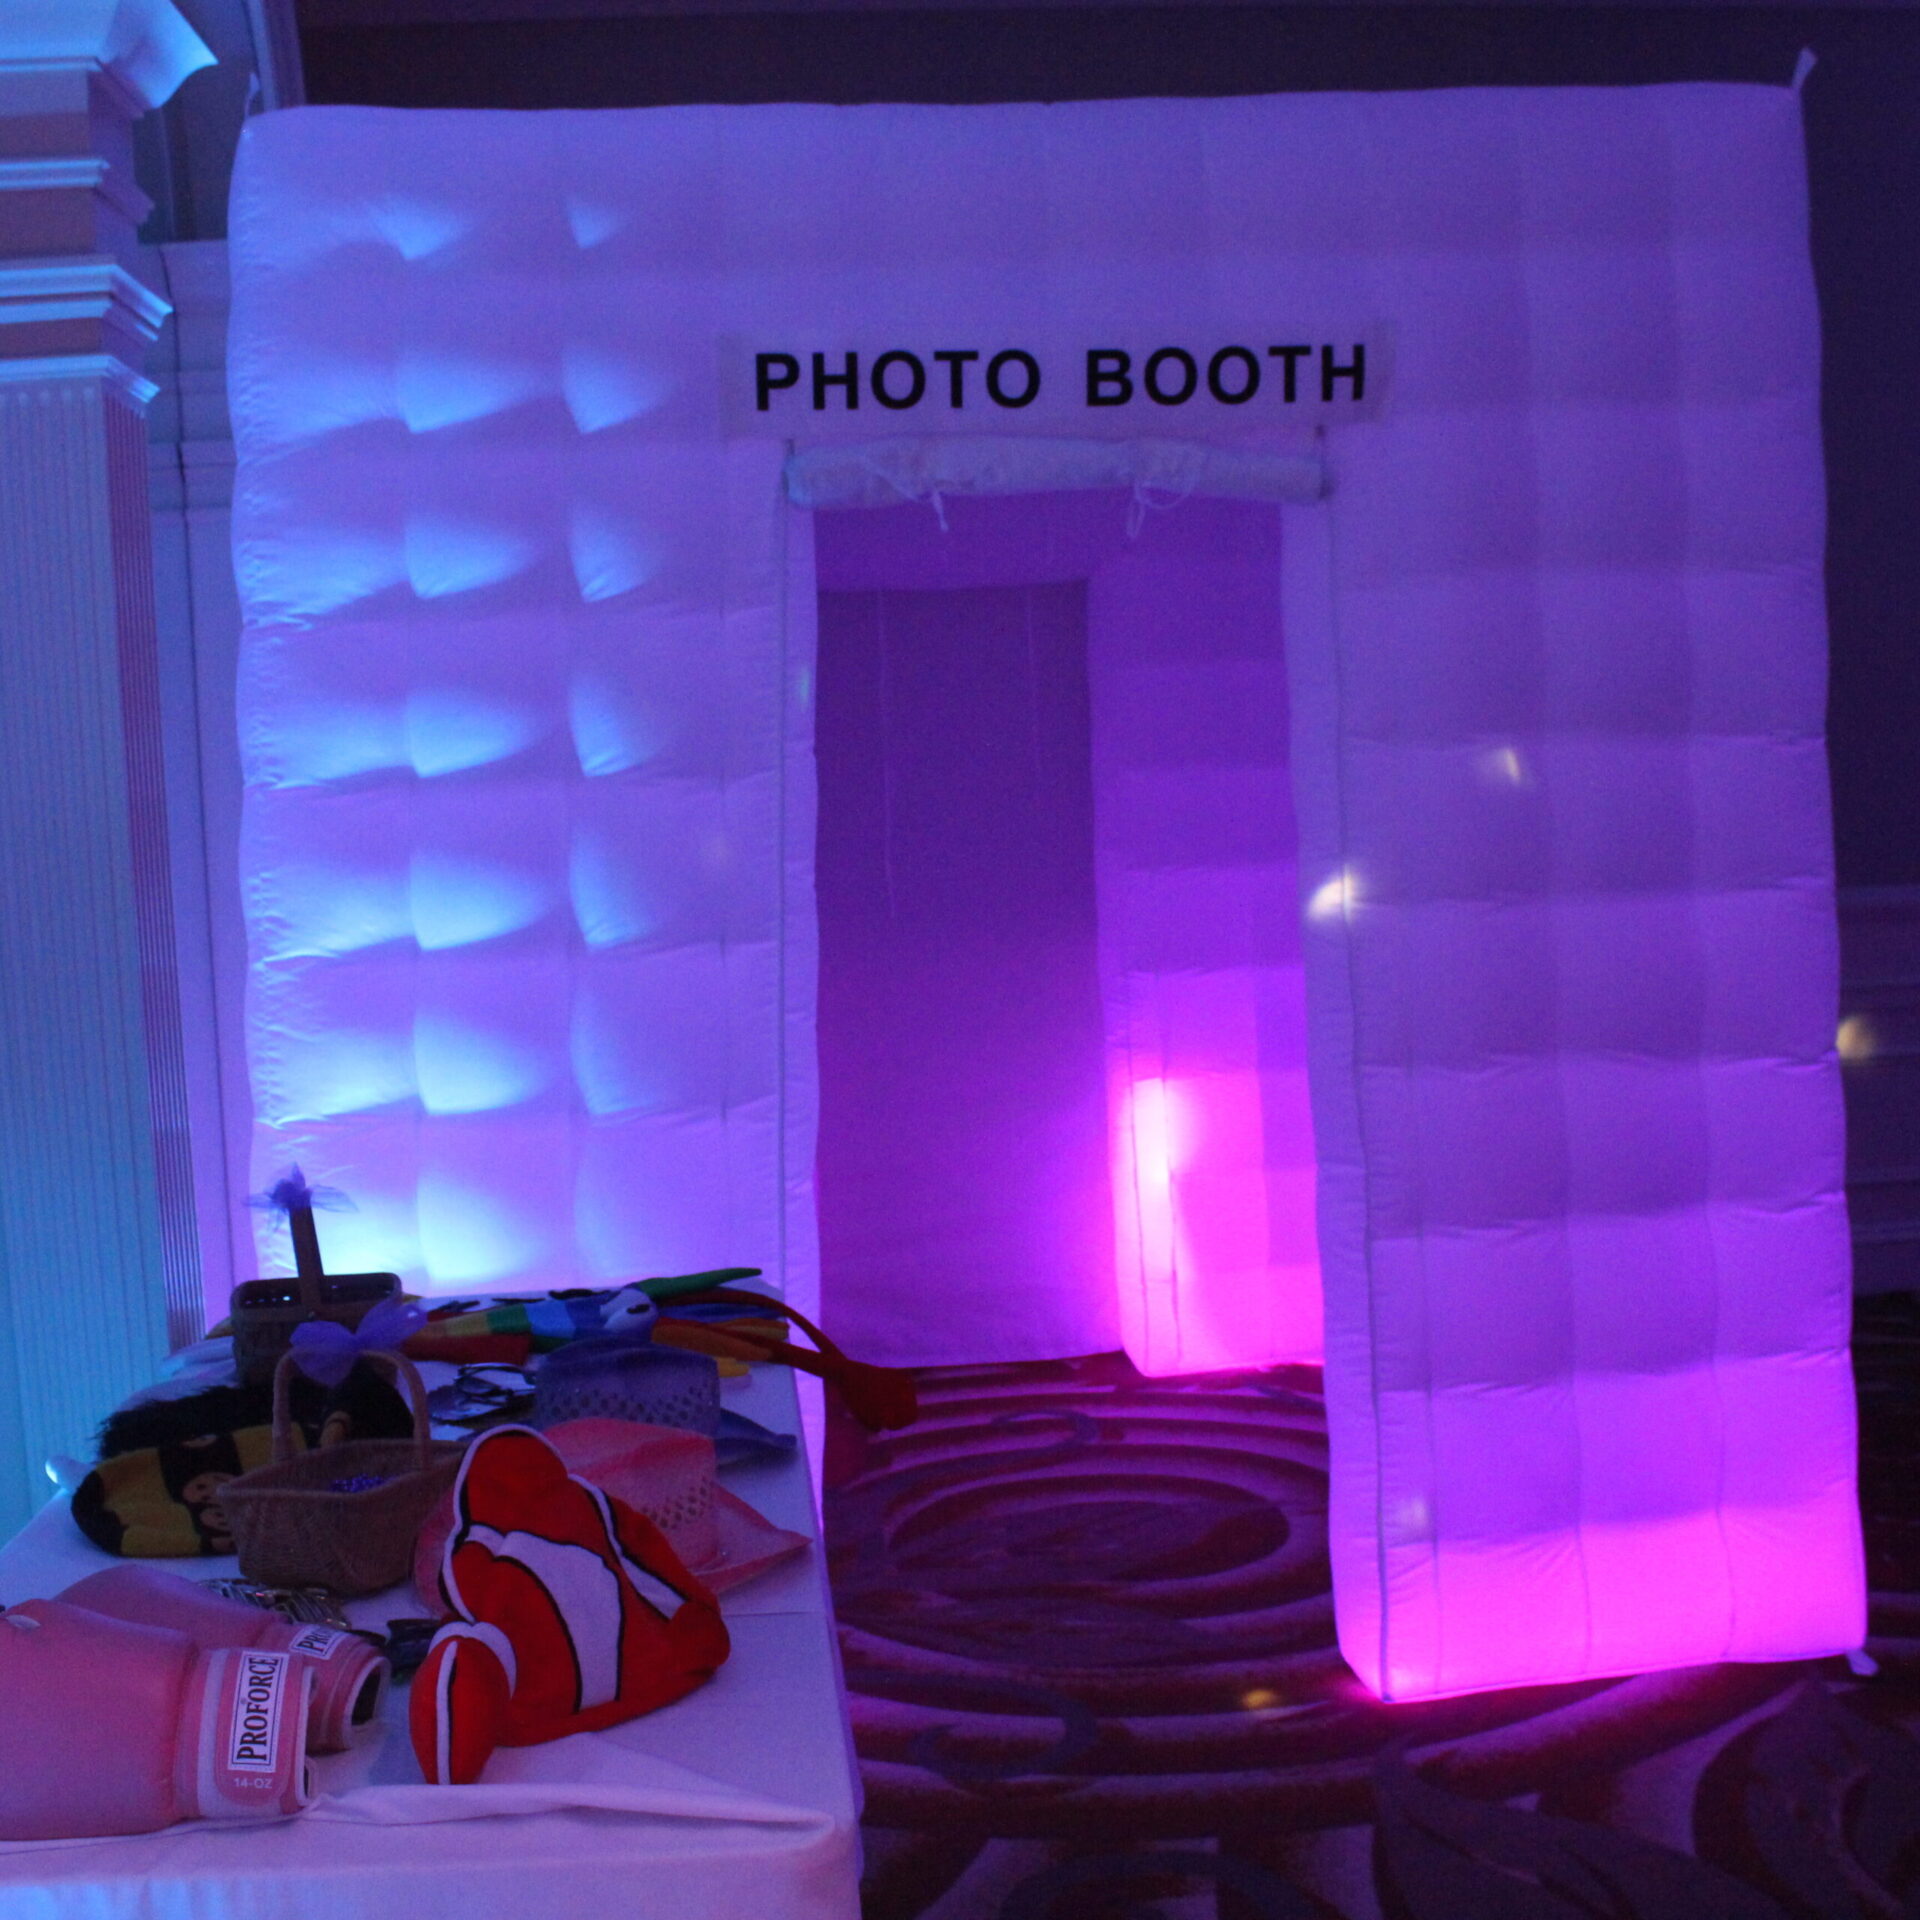 Professional DJ and Photo Booth Rental Services in Danbury CT